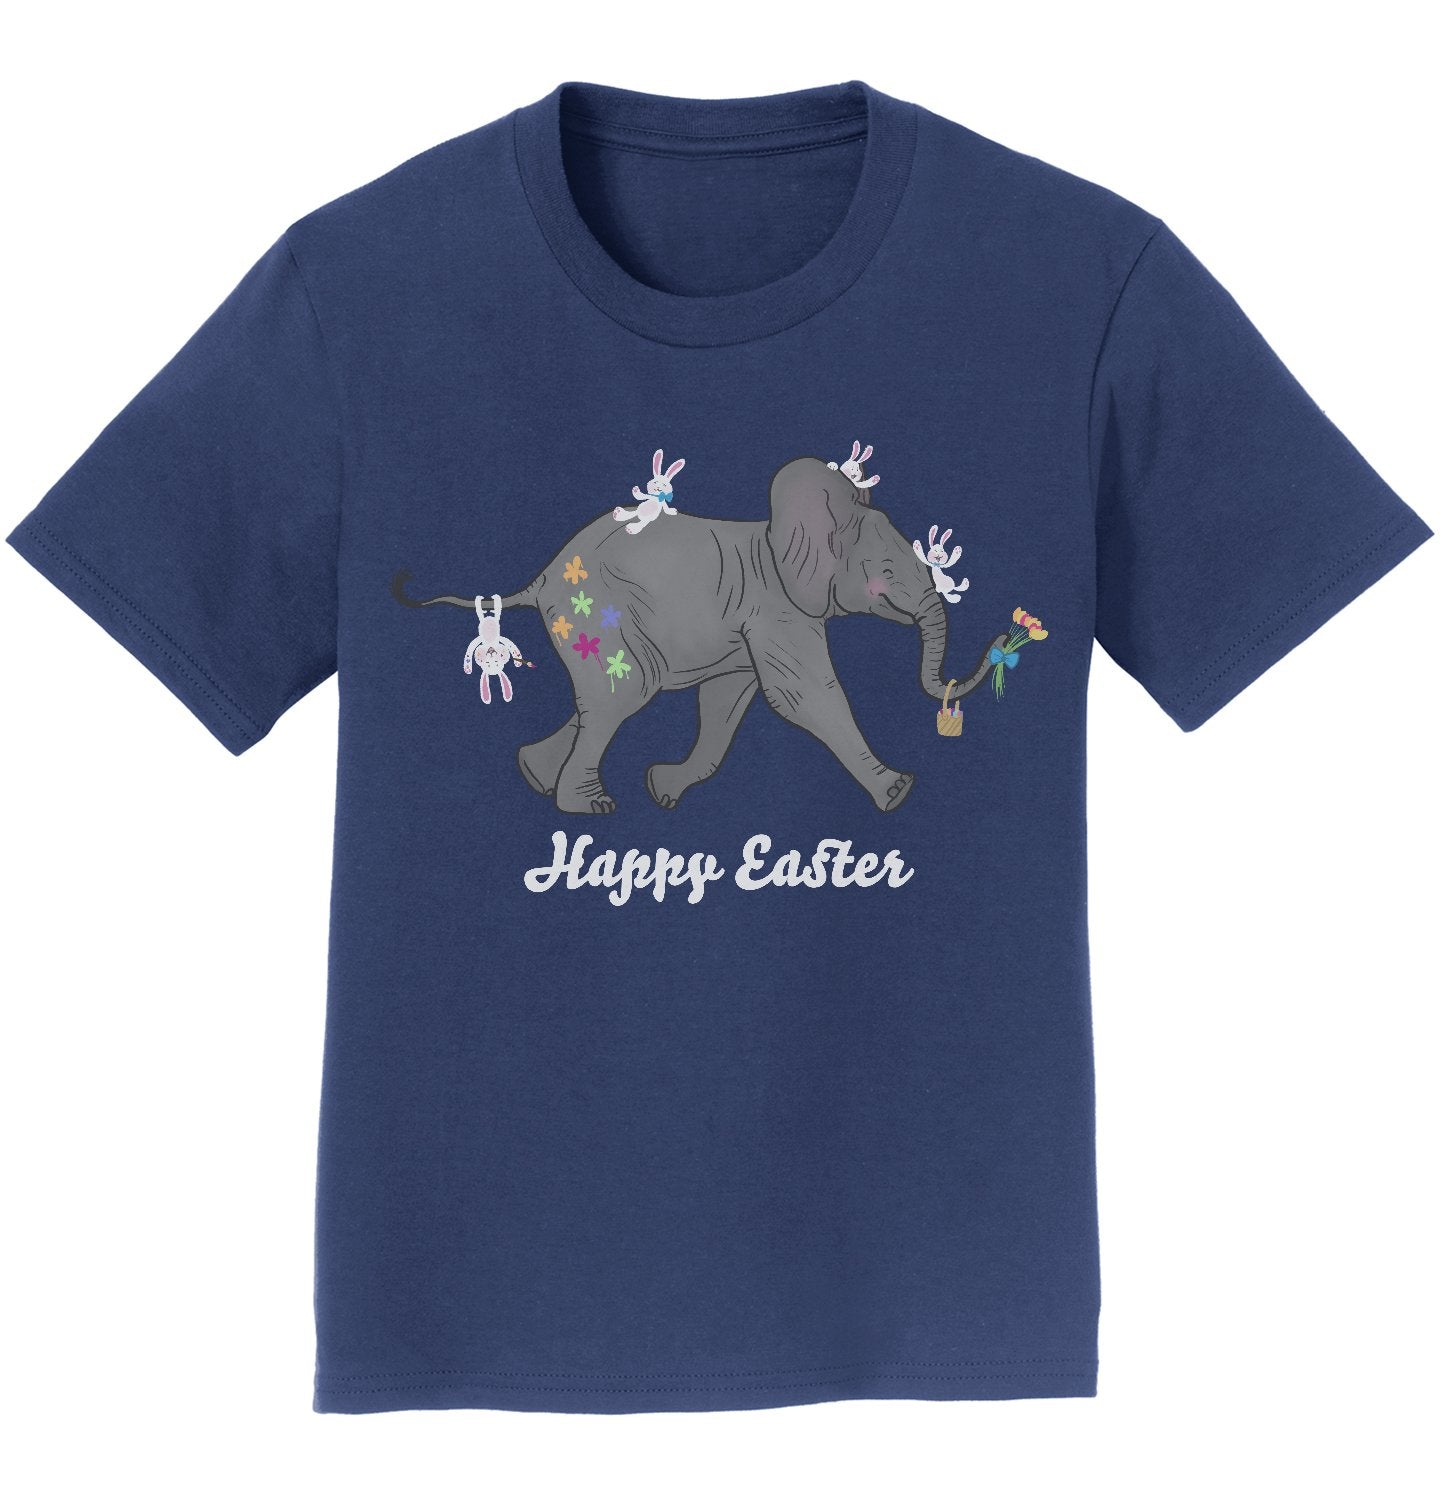 Animal Pride - Easter Baby Elephant and Friends  - Kids' Unisex T-Shirt